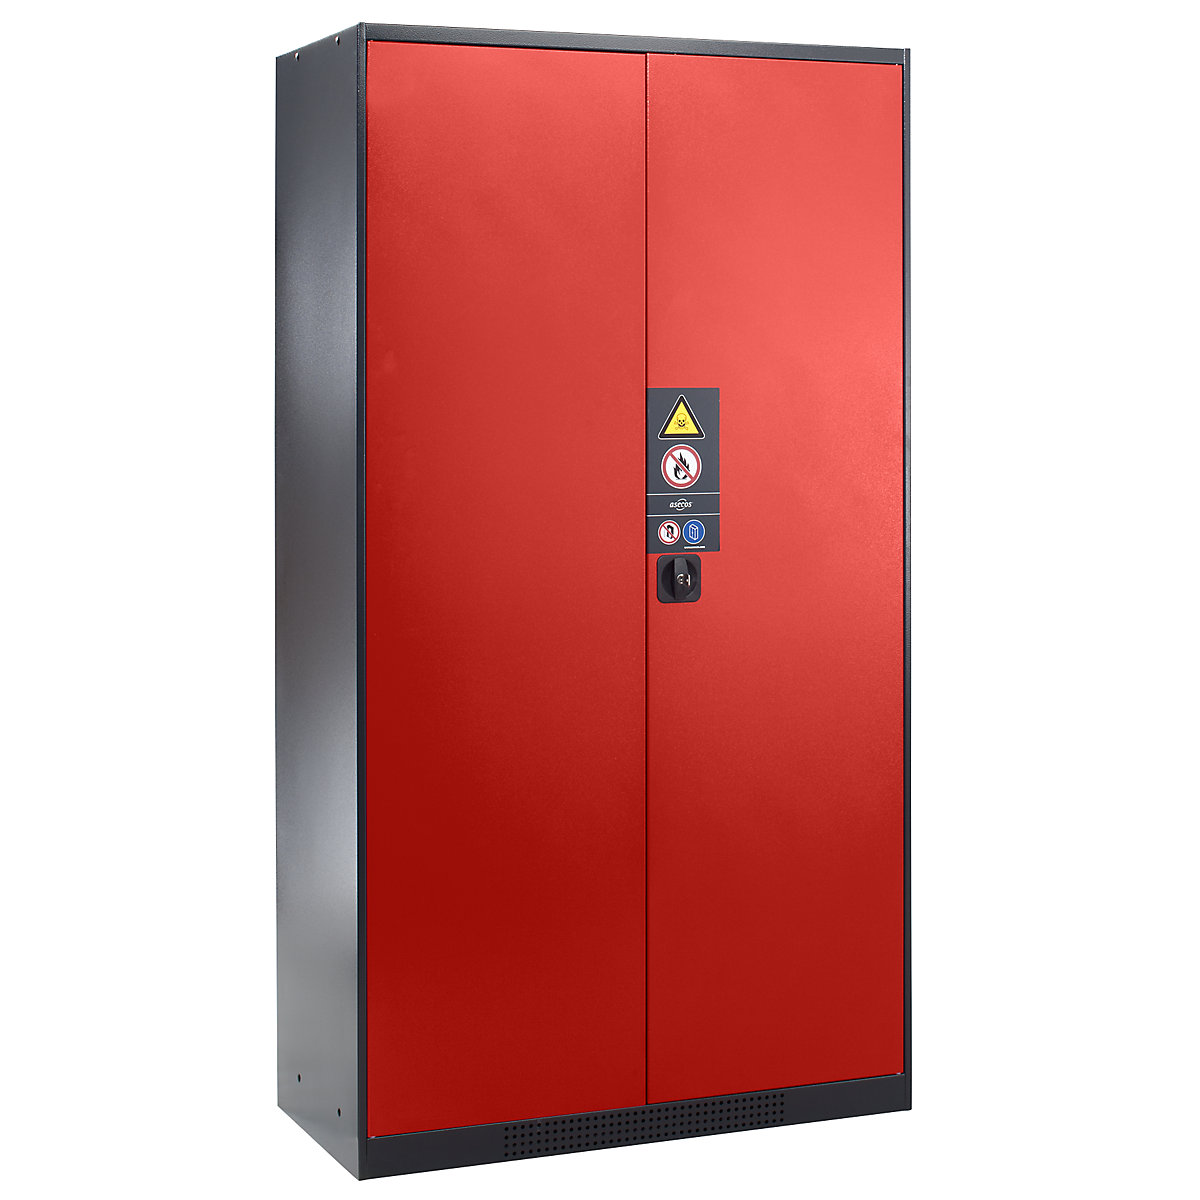 Chemical storage cupboard - asecos